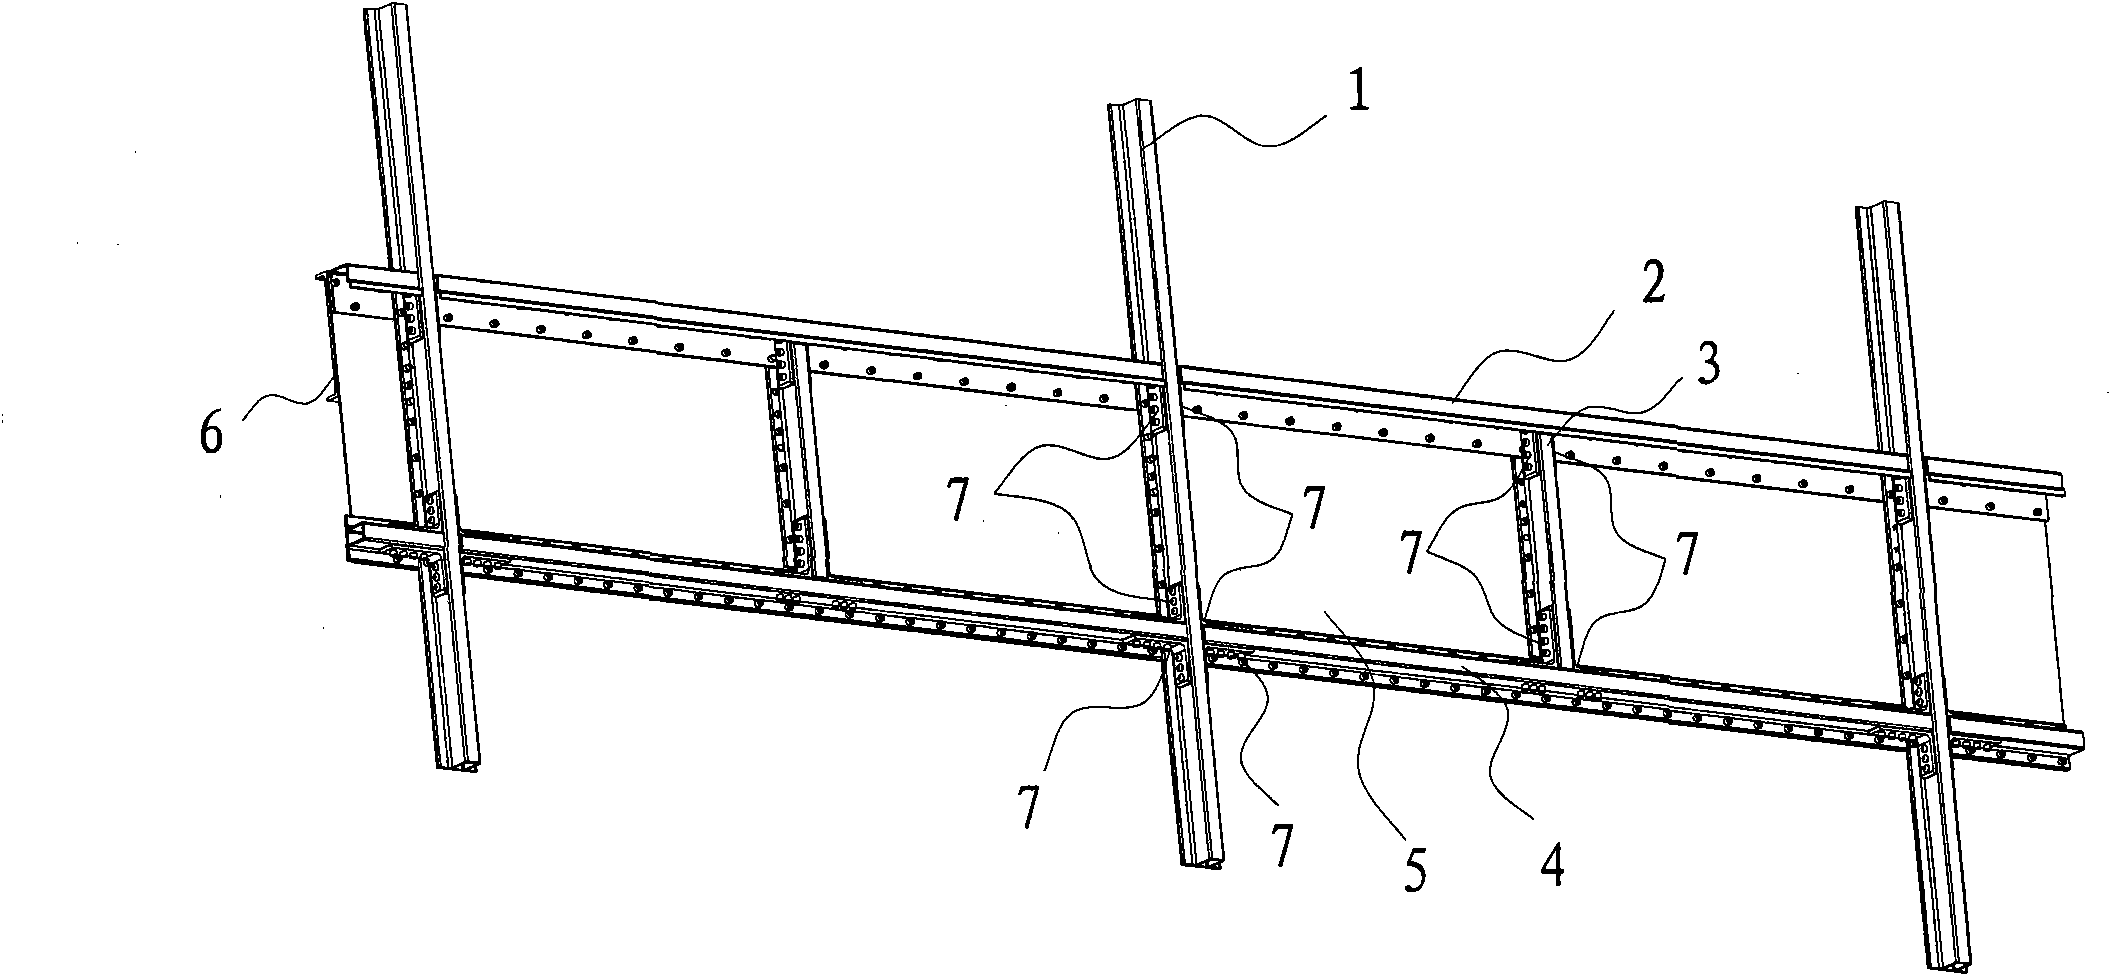 Connection structure of vehicle frame